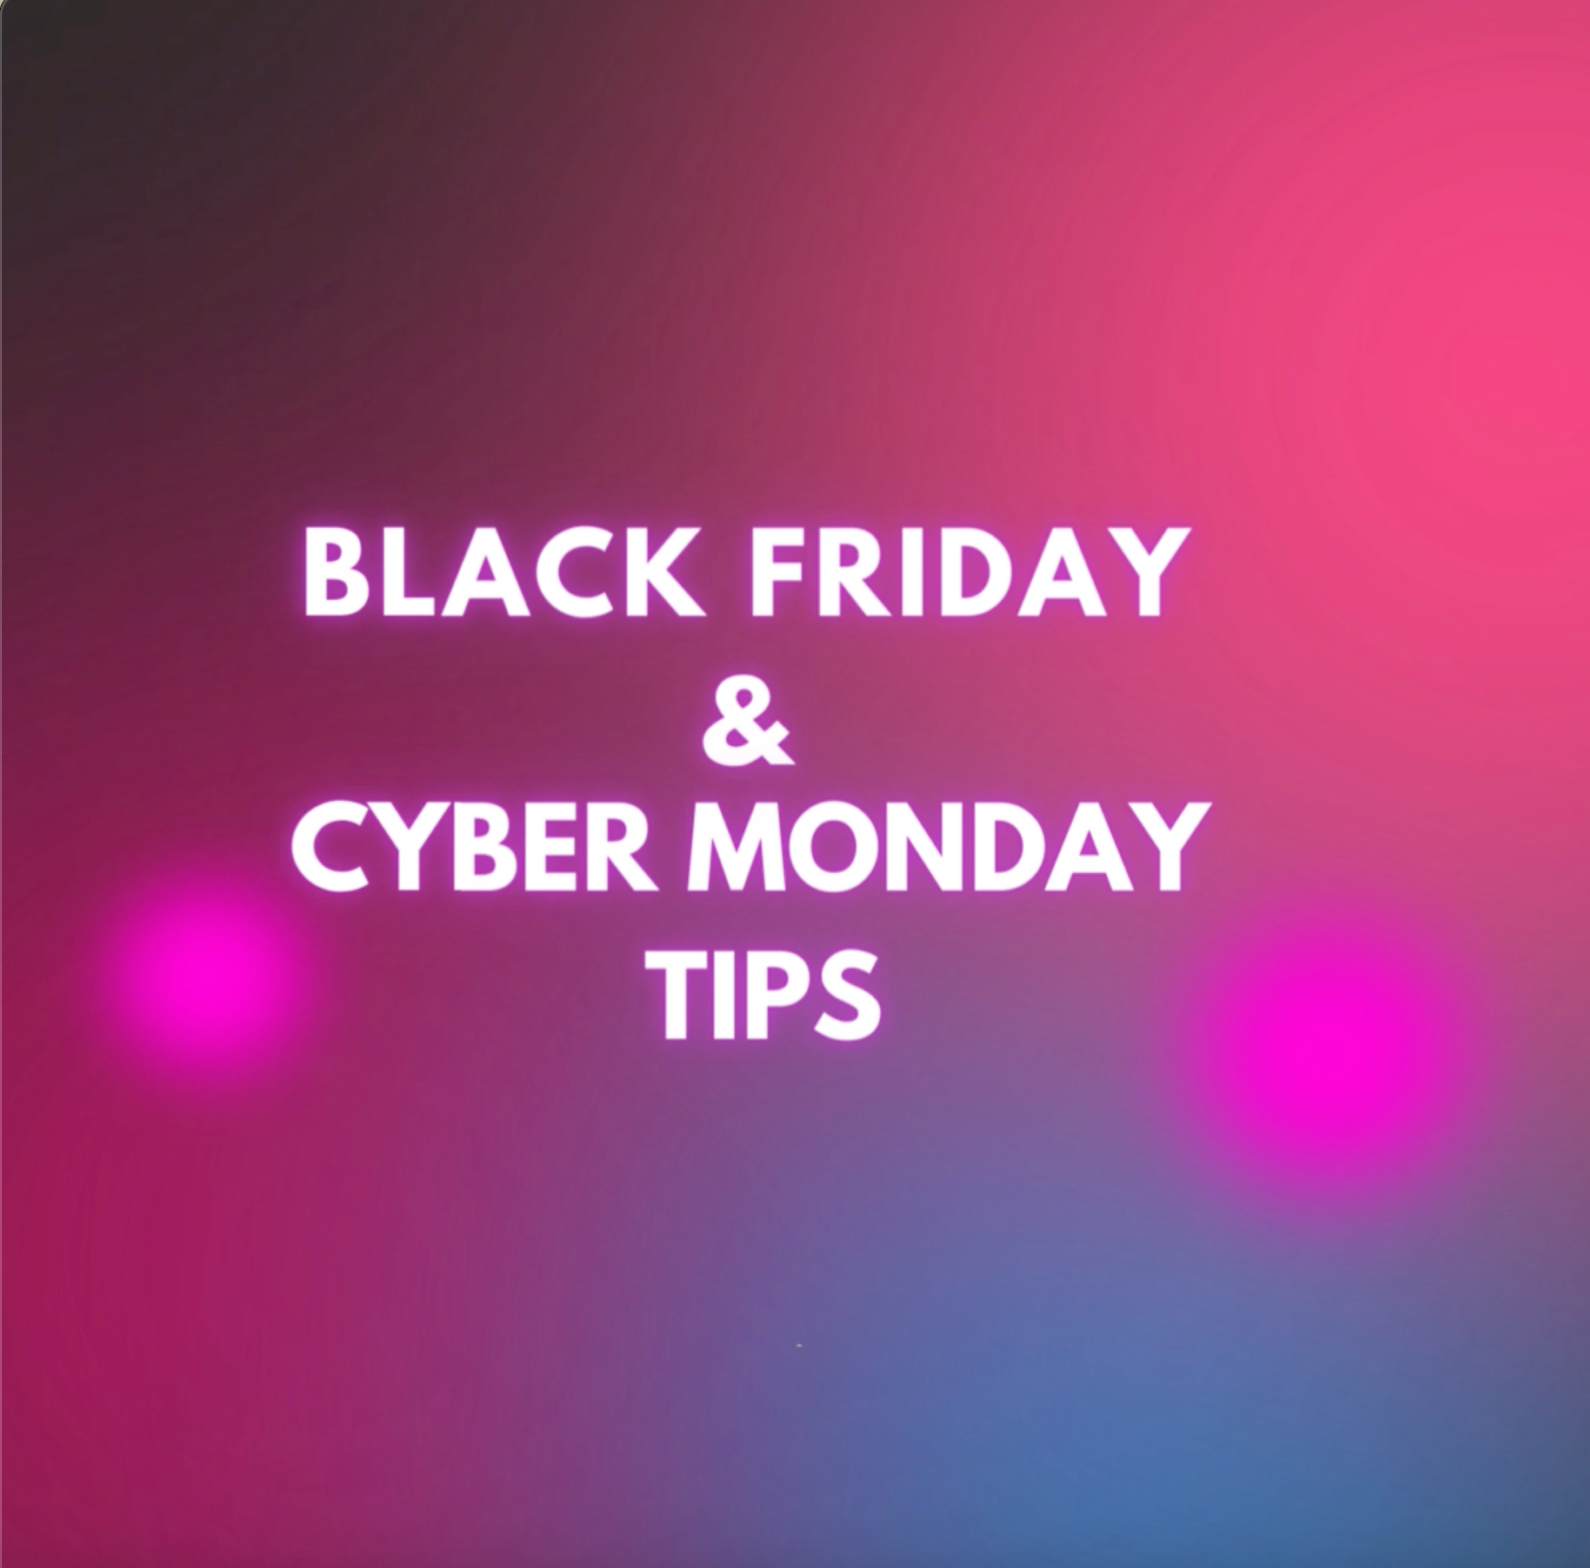 Are you prepared for Black Friday and Cyber Monday?